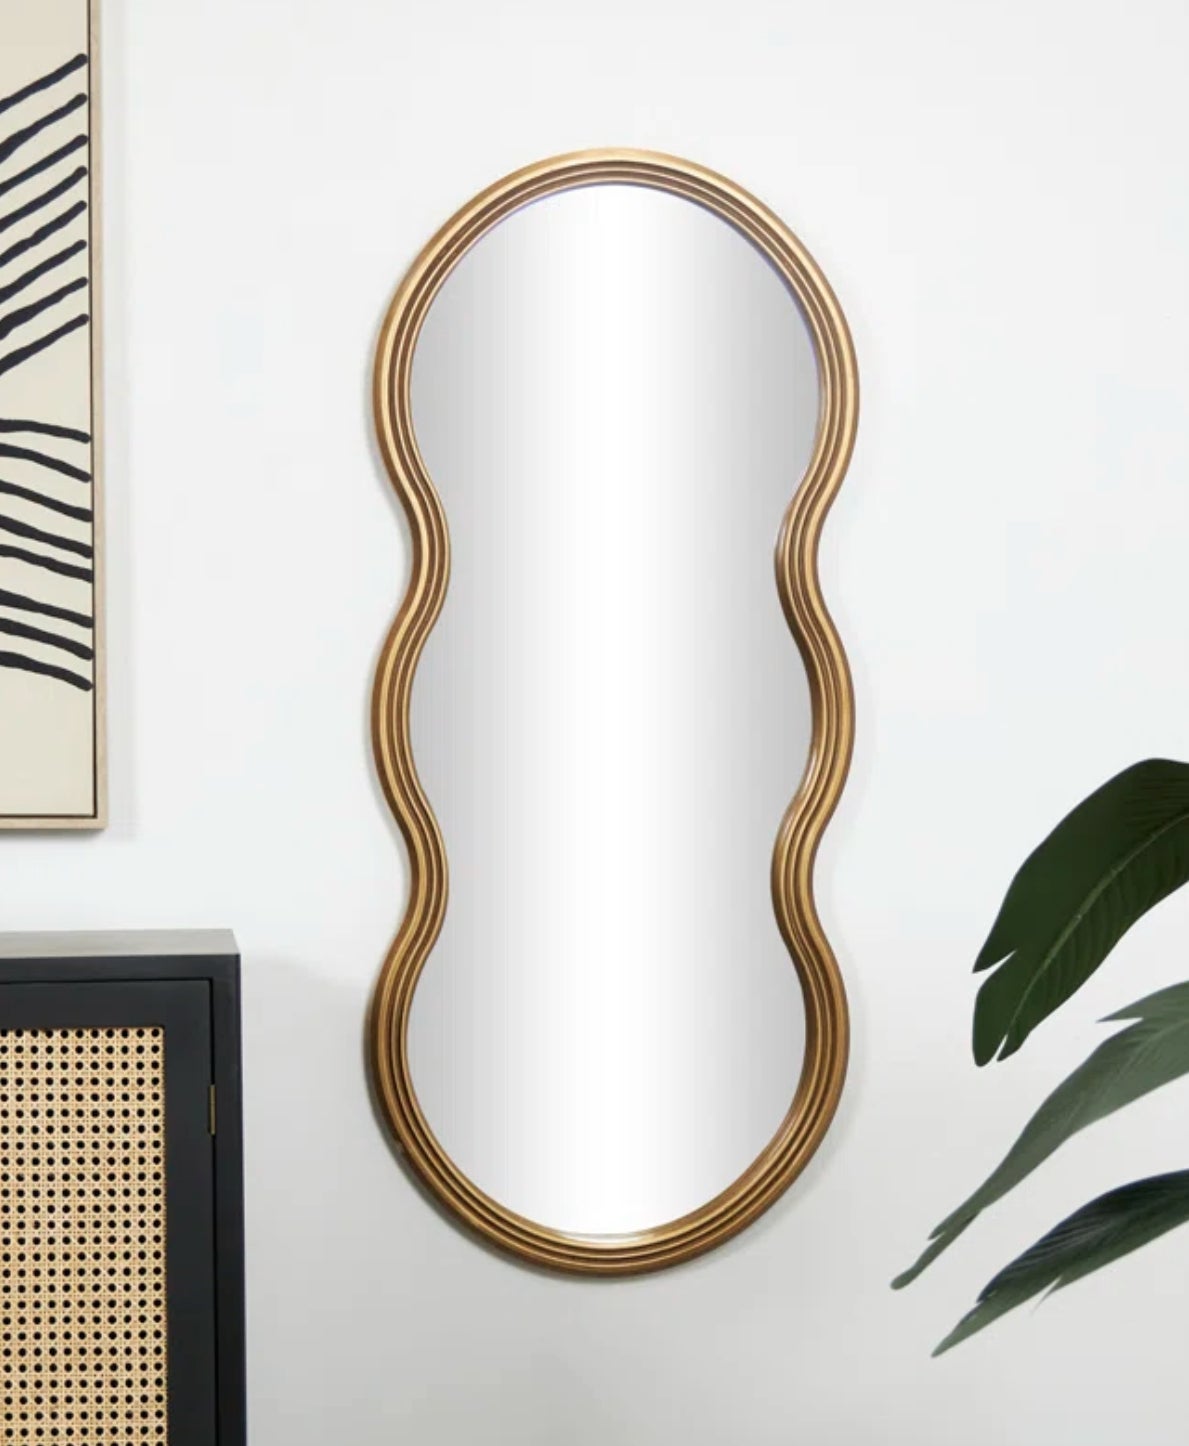 Oval wall mirror with a gold-tone frame, mounted beside artwork and above a black cabinet